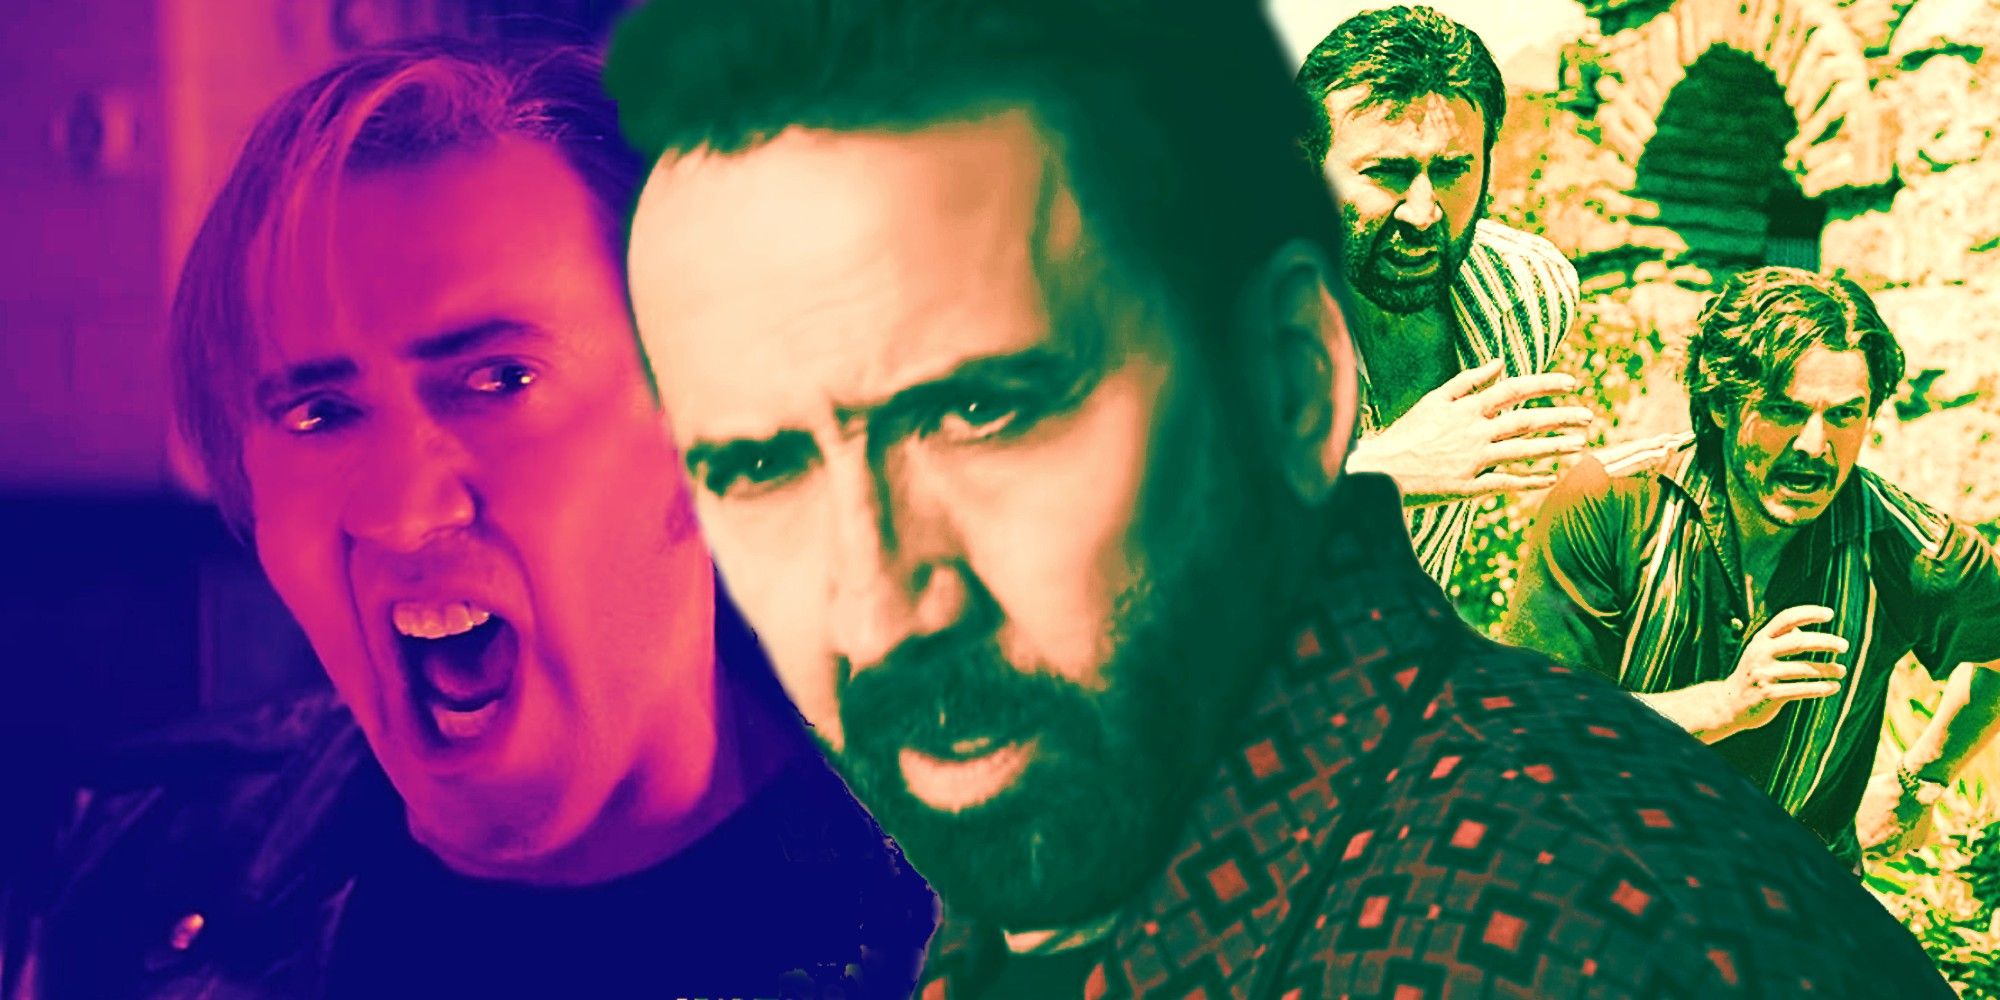 Collage of Nicolas Cage and Pedro Pascal in The Unbearable Weight of Massive Talent